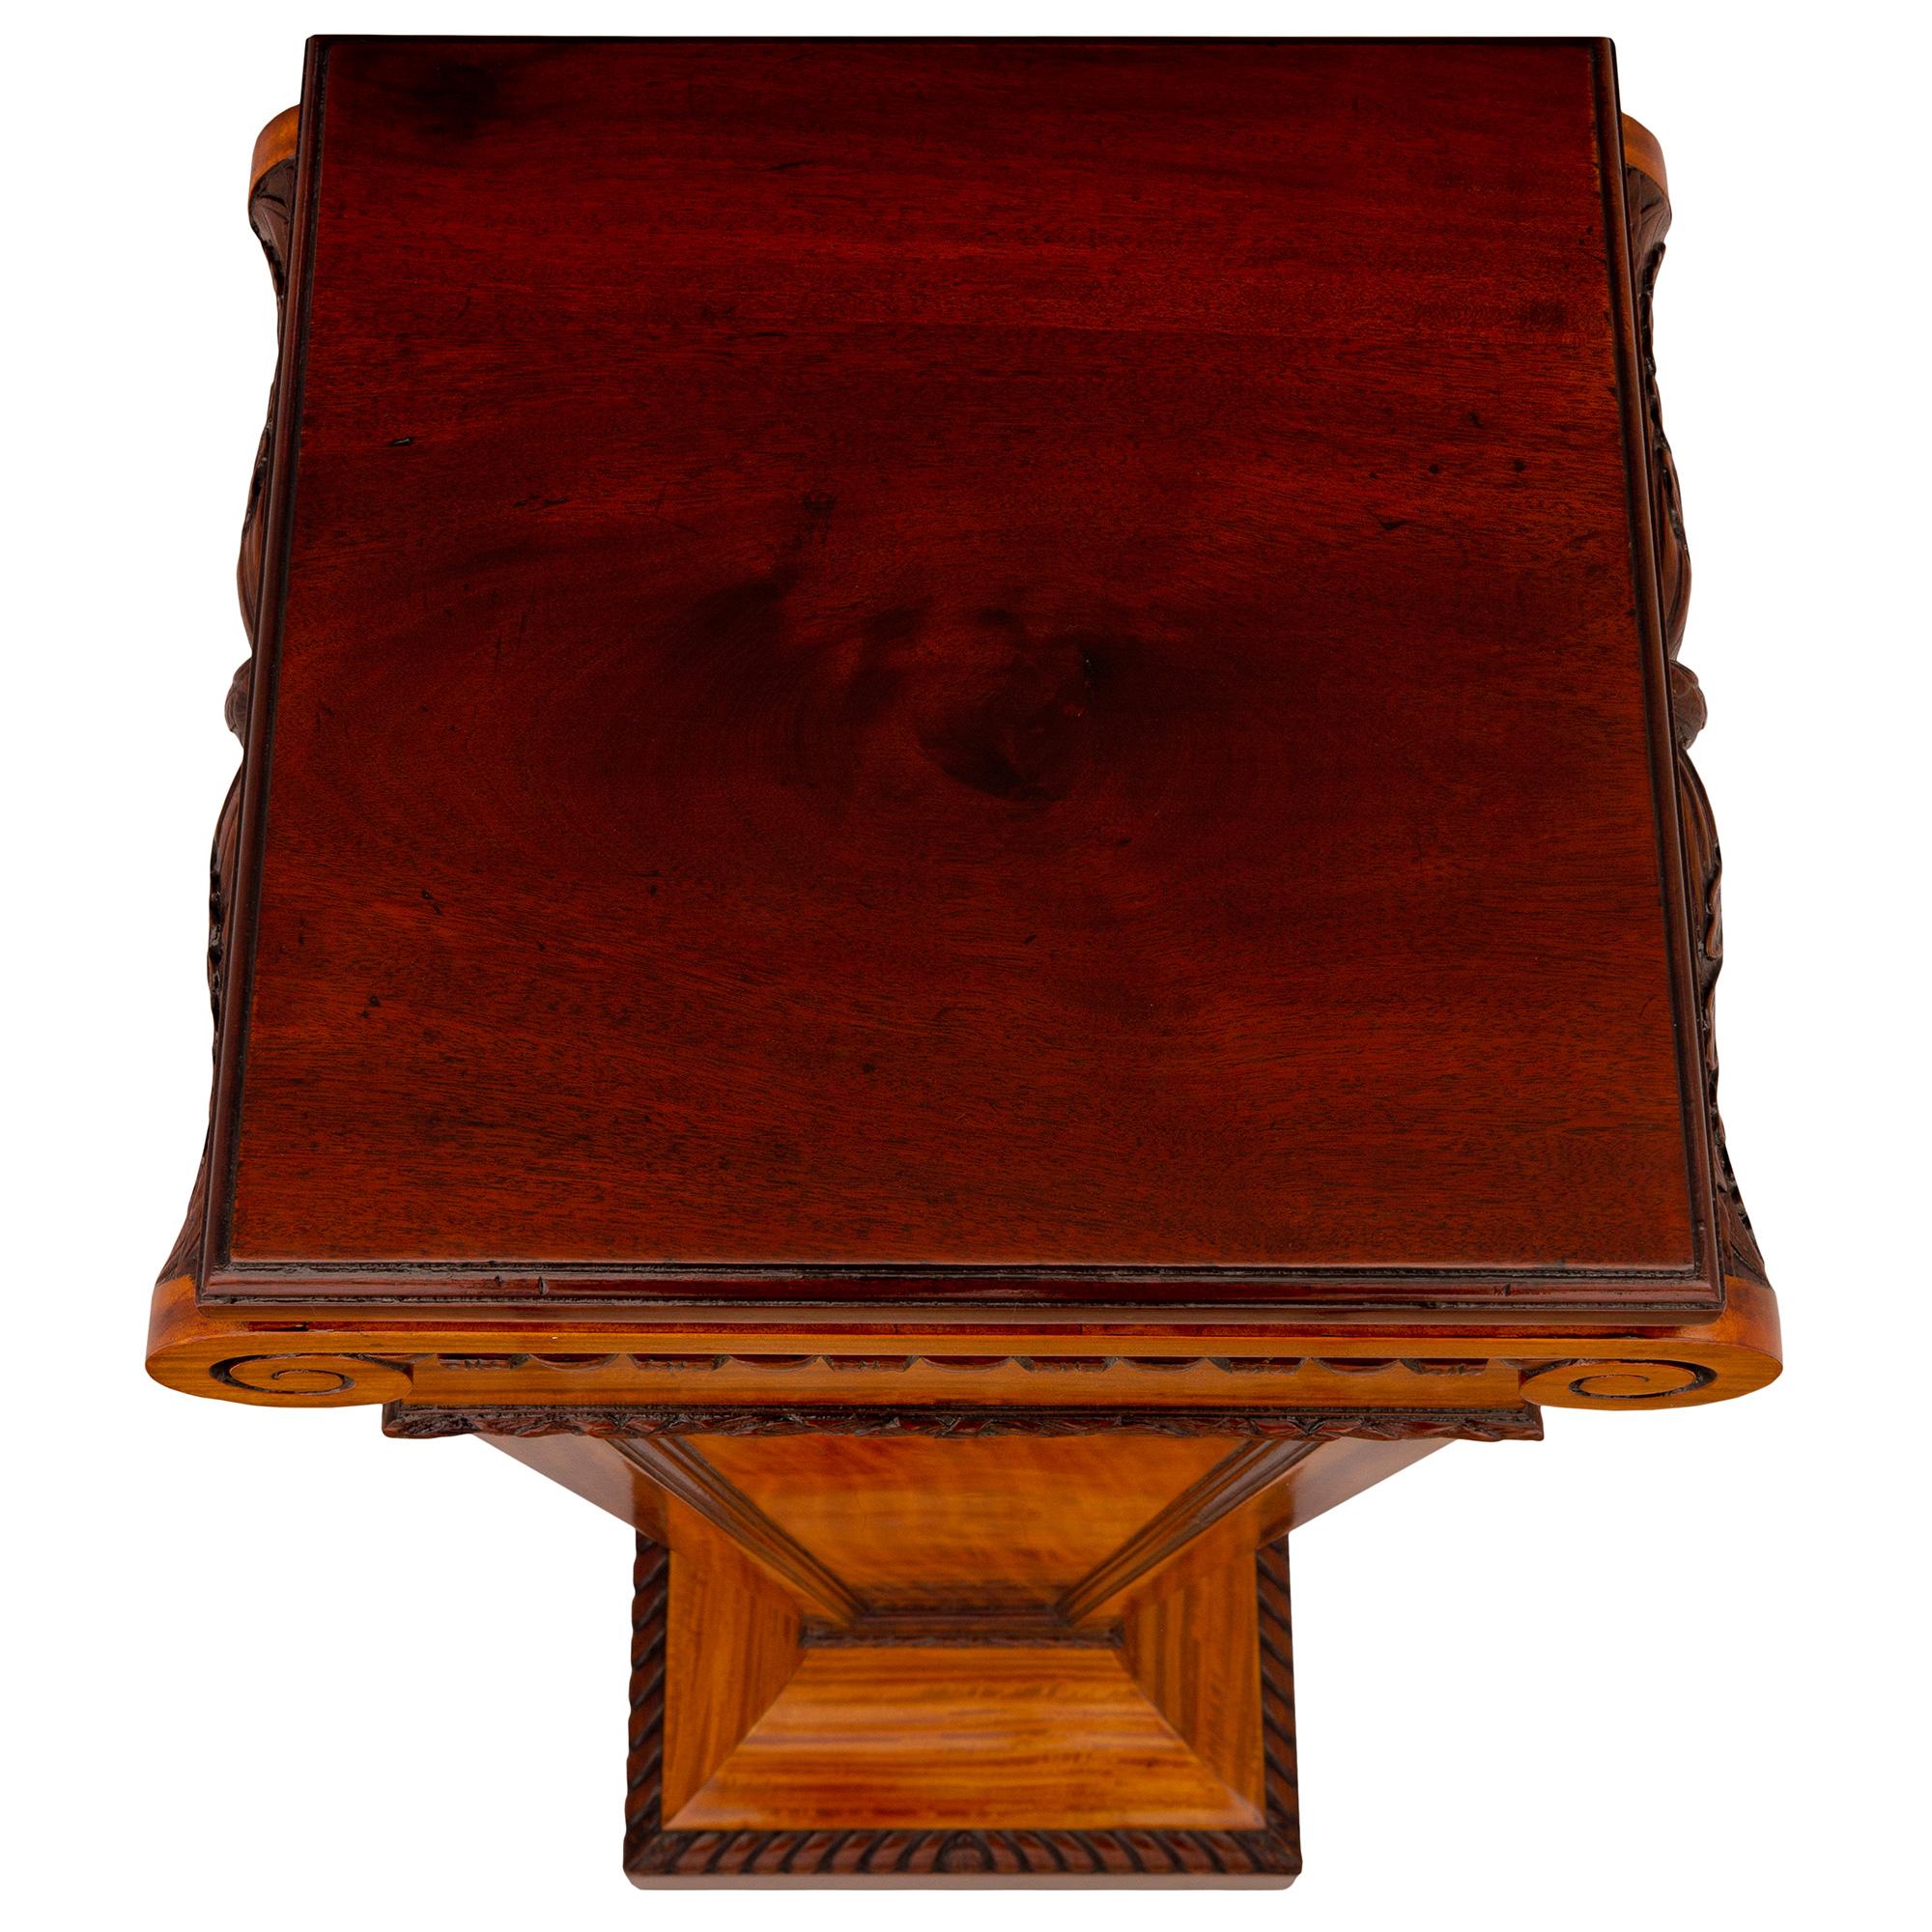 An elegant English 19th century Regency st. Satinwood pedestal column. The pedestal is raised by a square base with a finely carved wrap around gadroon design. Above the lightly curved socle shaped plinth is the square tapered central support with